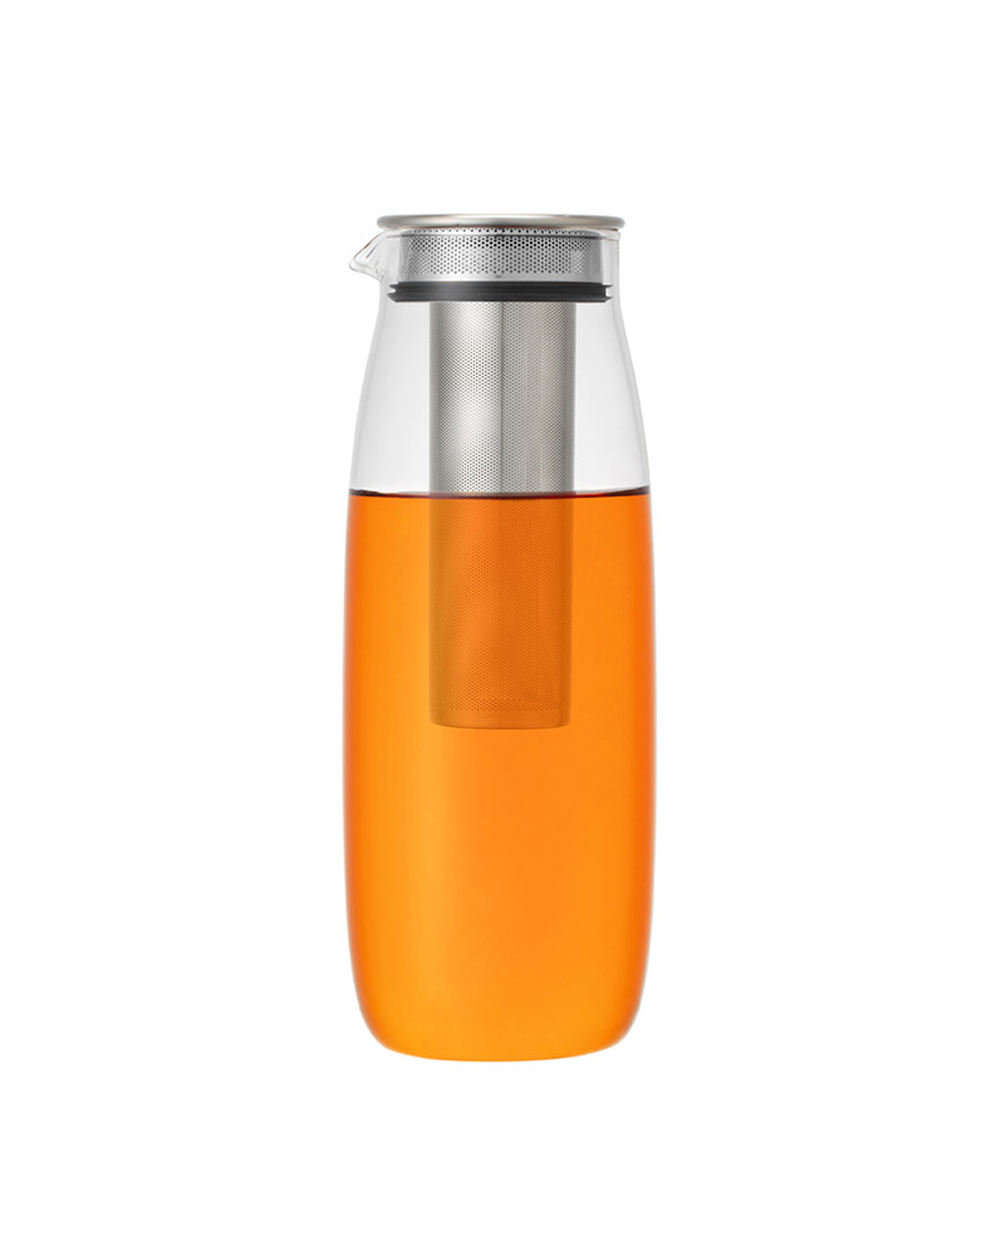 Unitea Cold Brew Carafe 1.1L - Stainless Steel